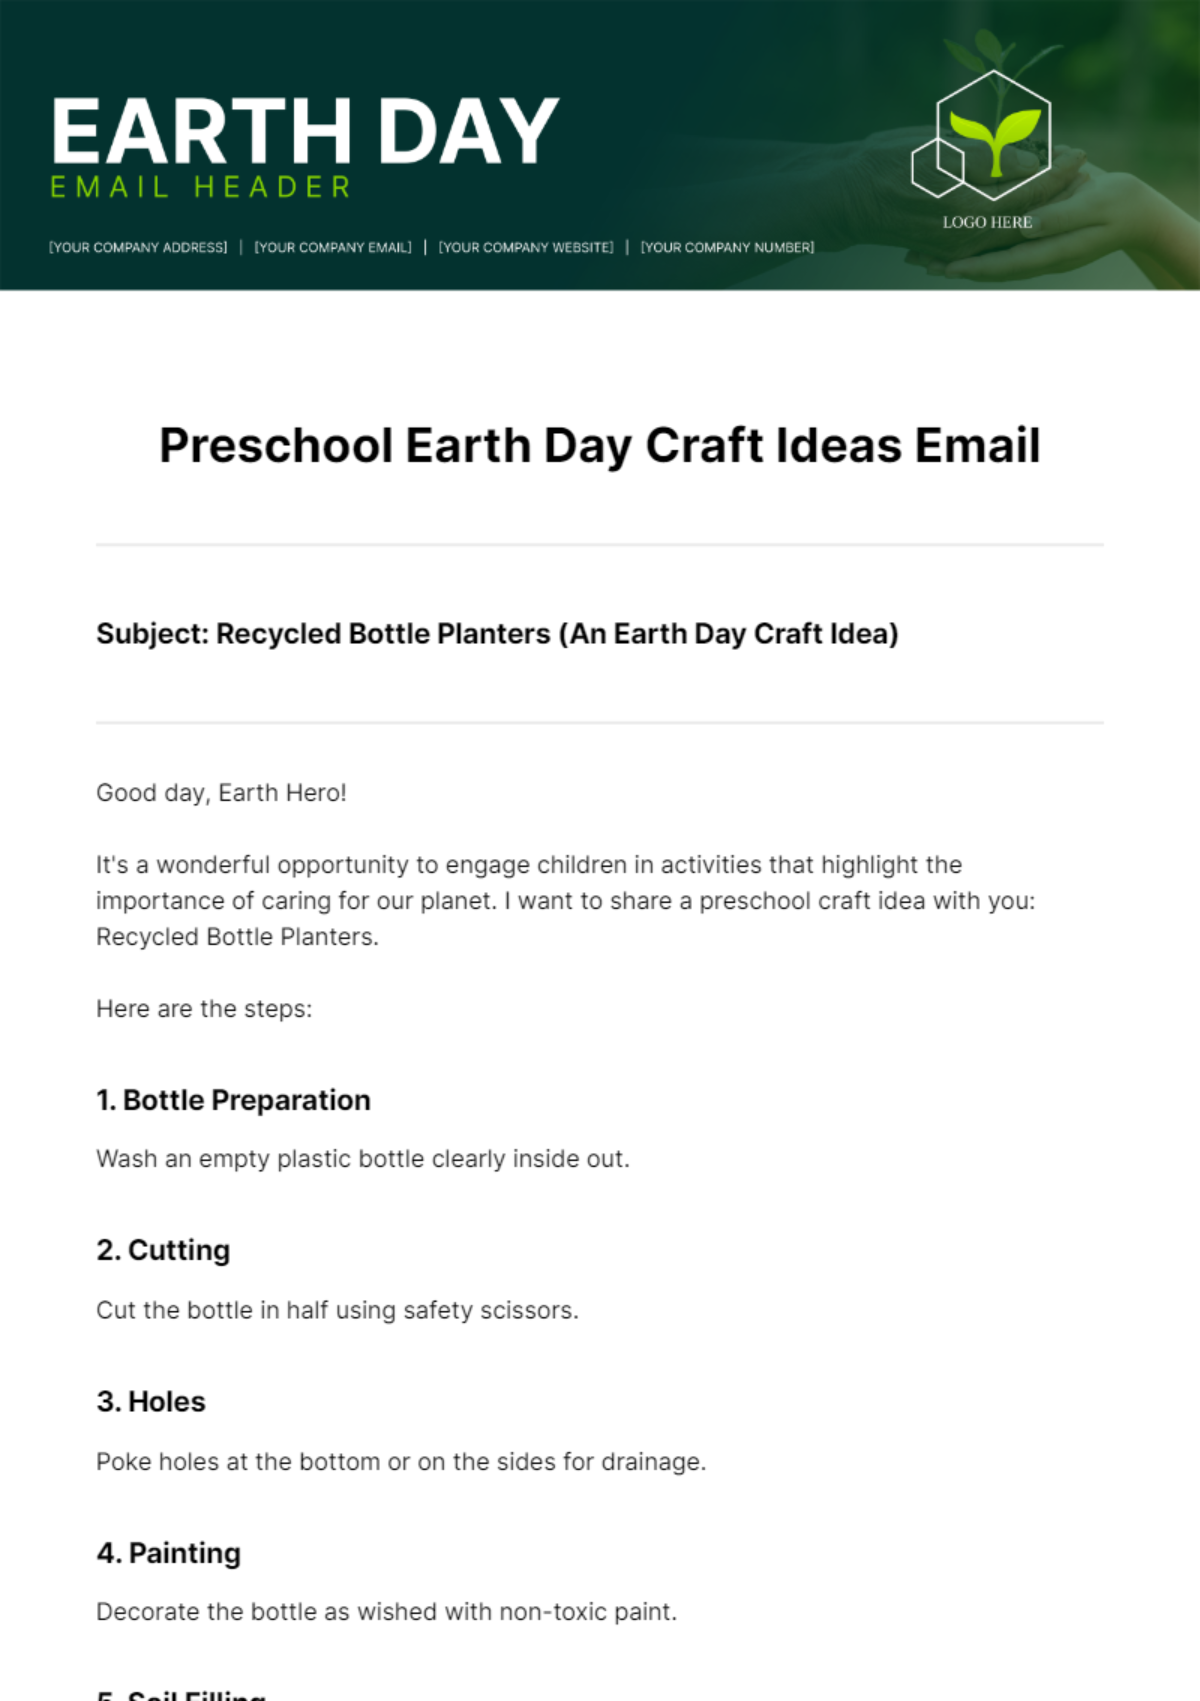 Free Preschool Earth Day Craft Ideas Email Template